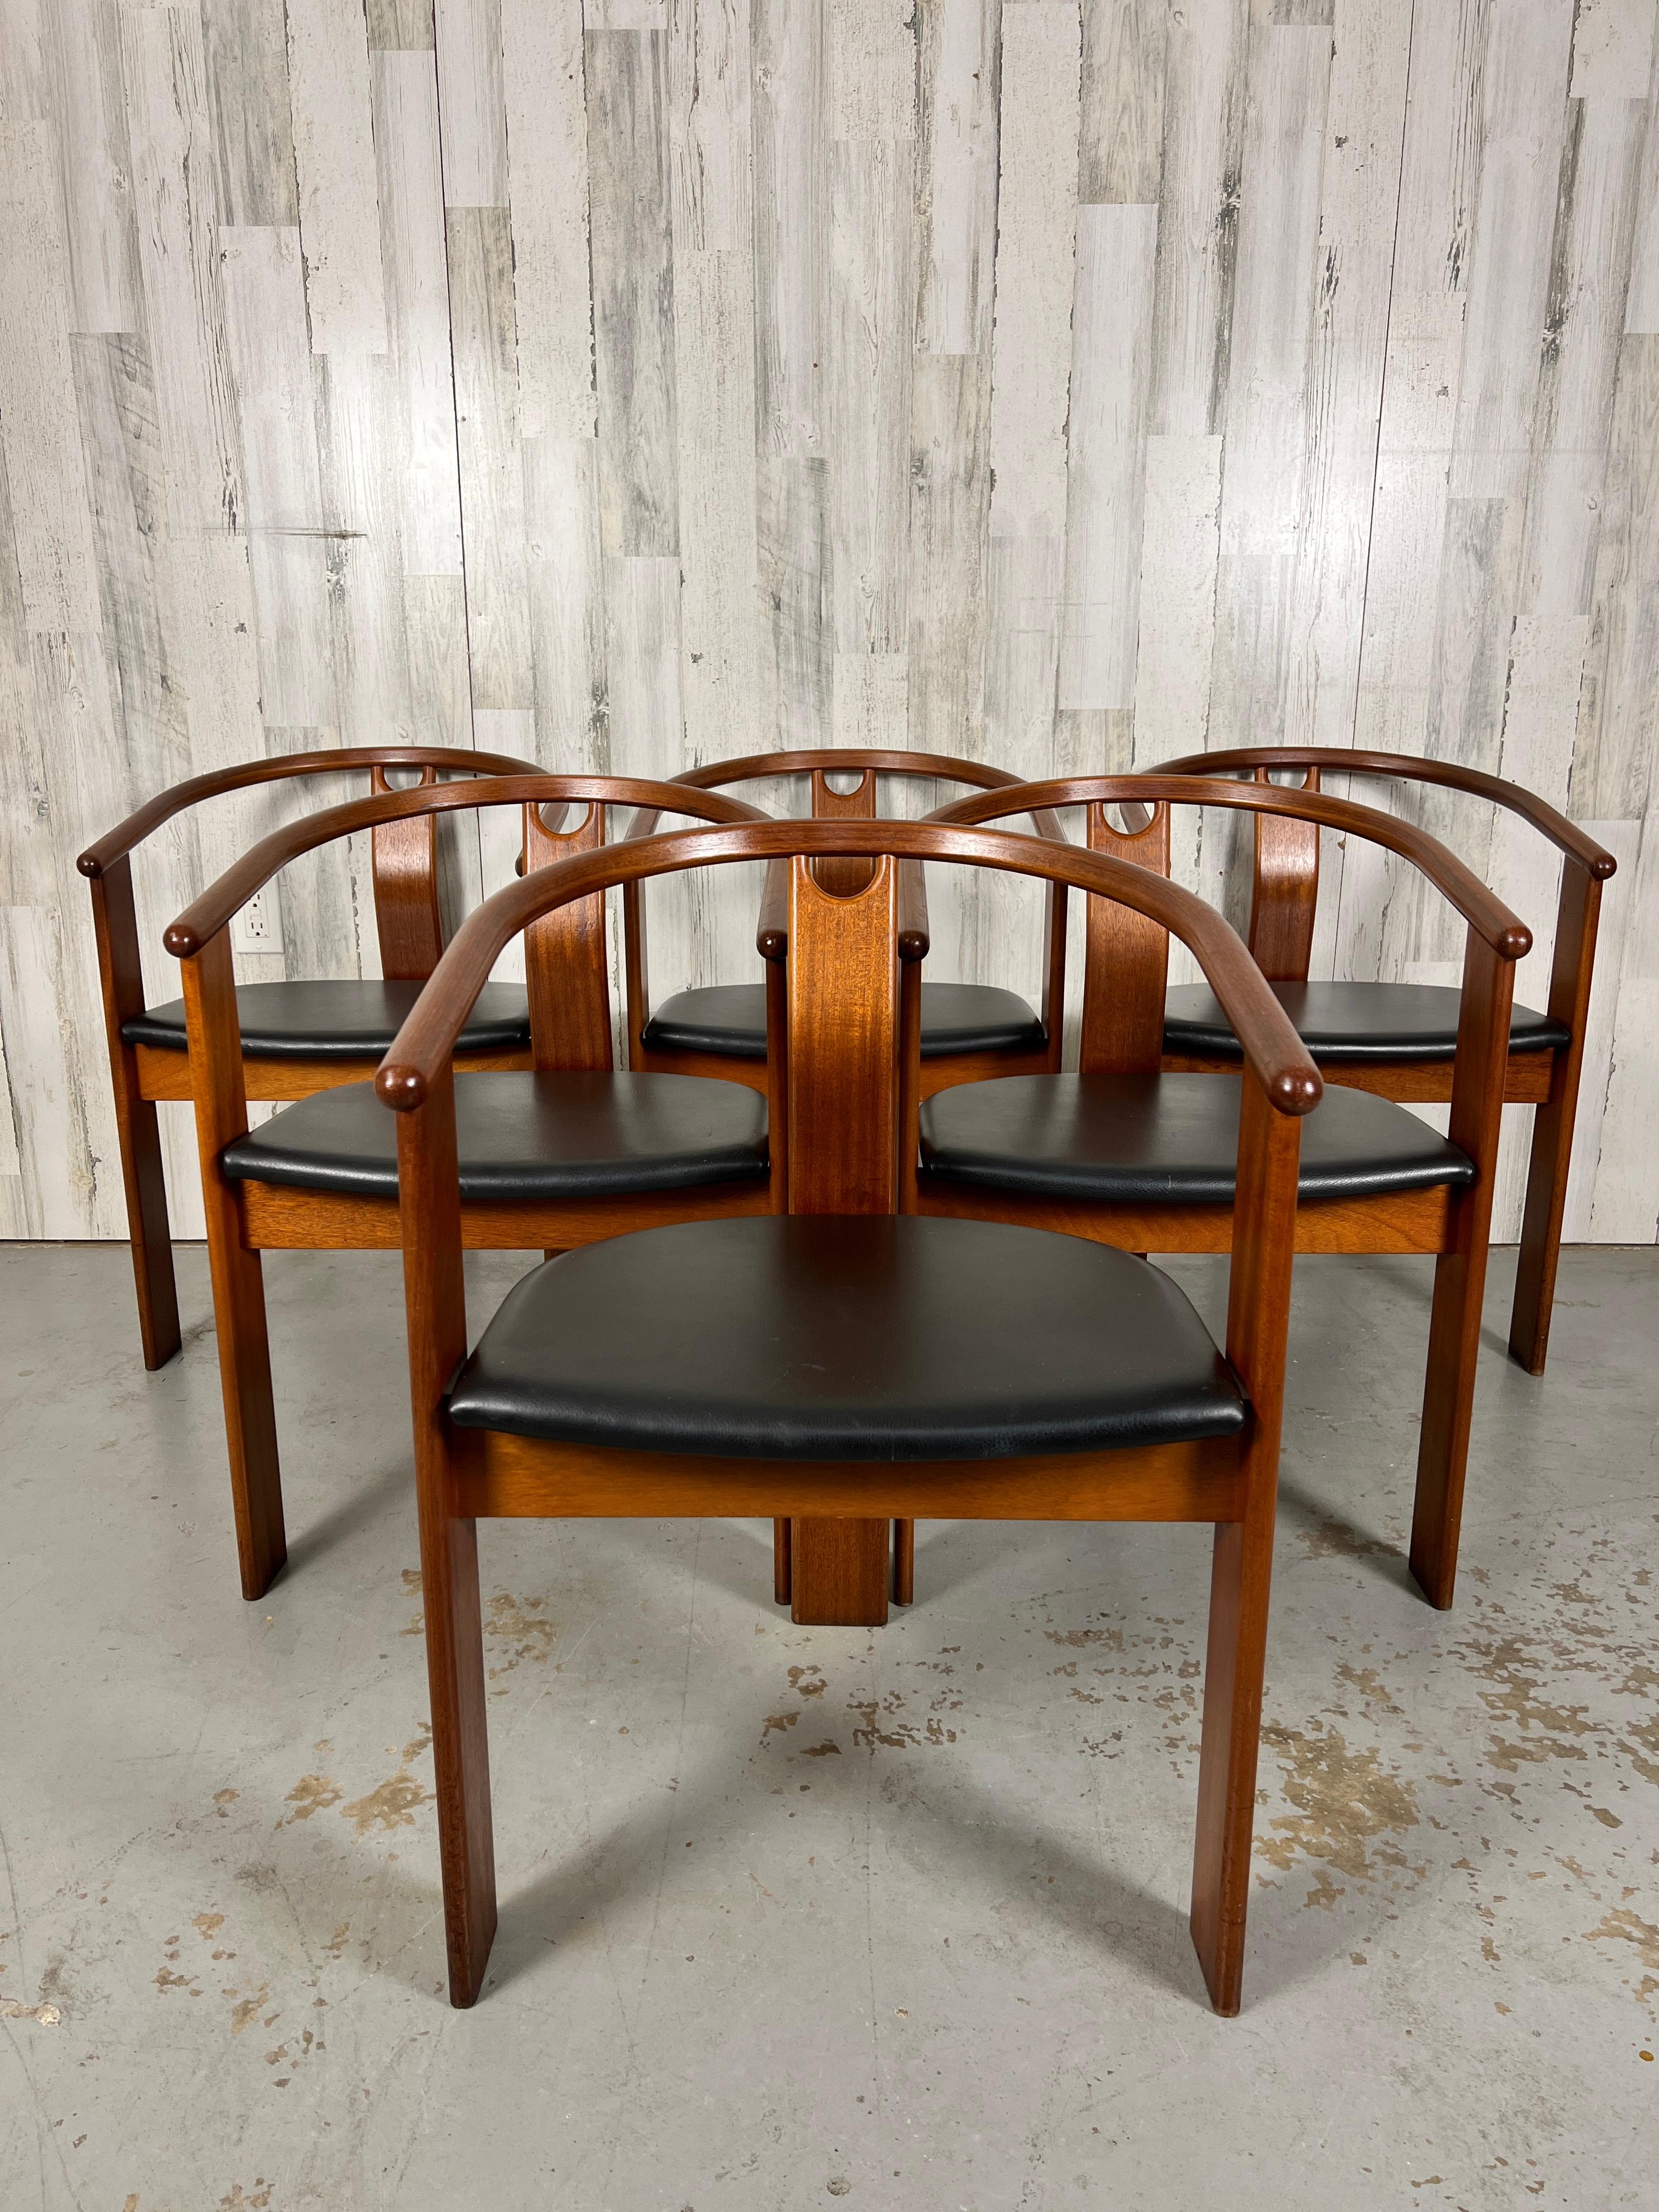 Landerholm & Lund for Frederica stolefabrik tripod dining chairs. Mahogany armchairs with bentwood wishbone frames & black vinyl seats.